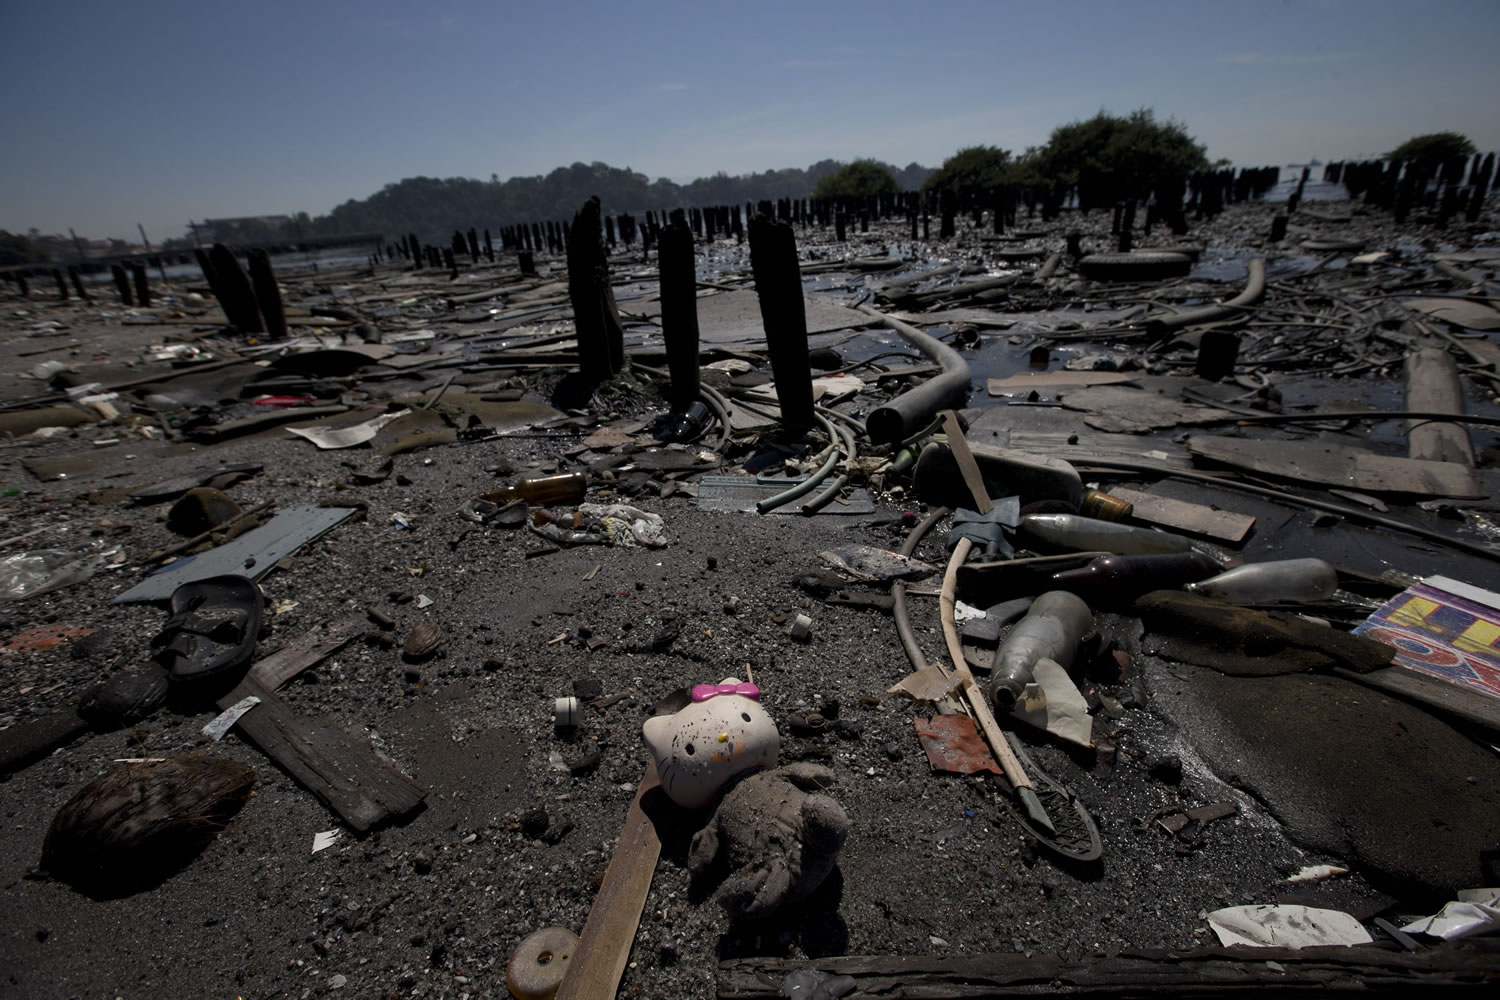 A Hello Kitty doll lays amid the garbage scattered in Guanabara Bay in Rio de Janeiro, Brazil. Rio Governor Luiz Fernando Pezao recently pushed back the 2016 deadline for cleaning the bay where the Olympic sailing competitions are to be staged, to 2035.